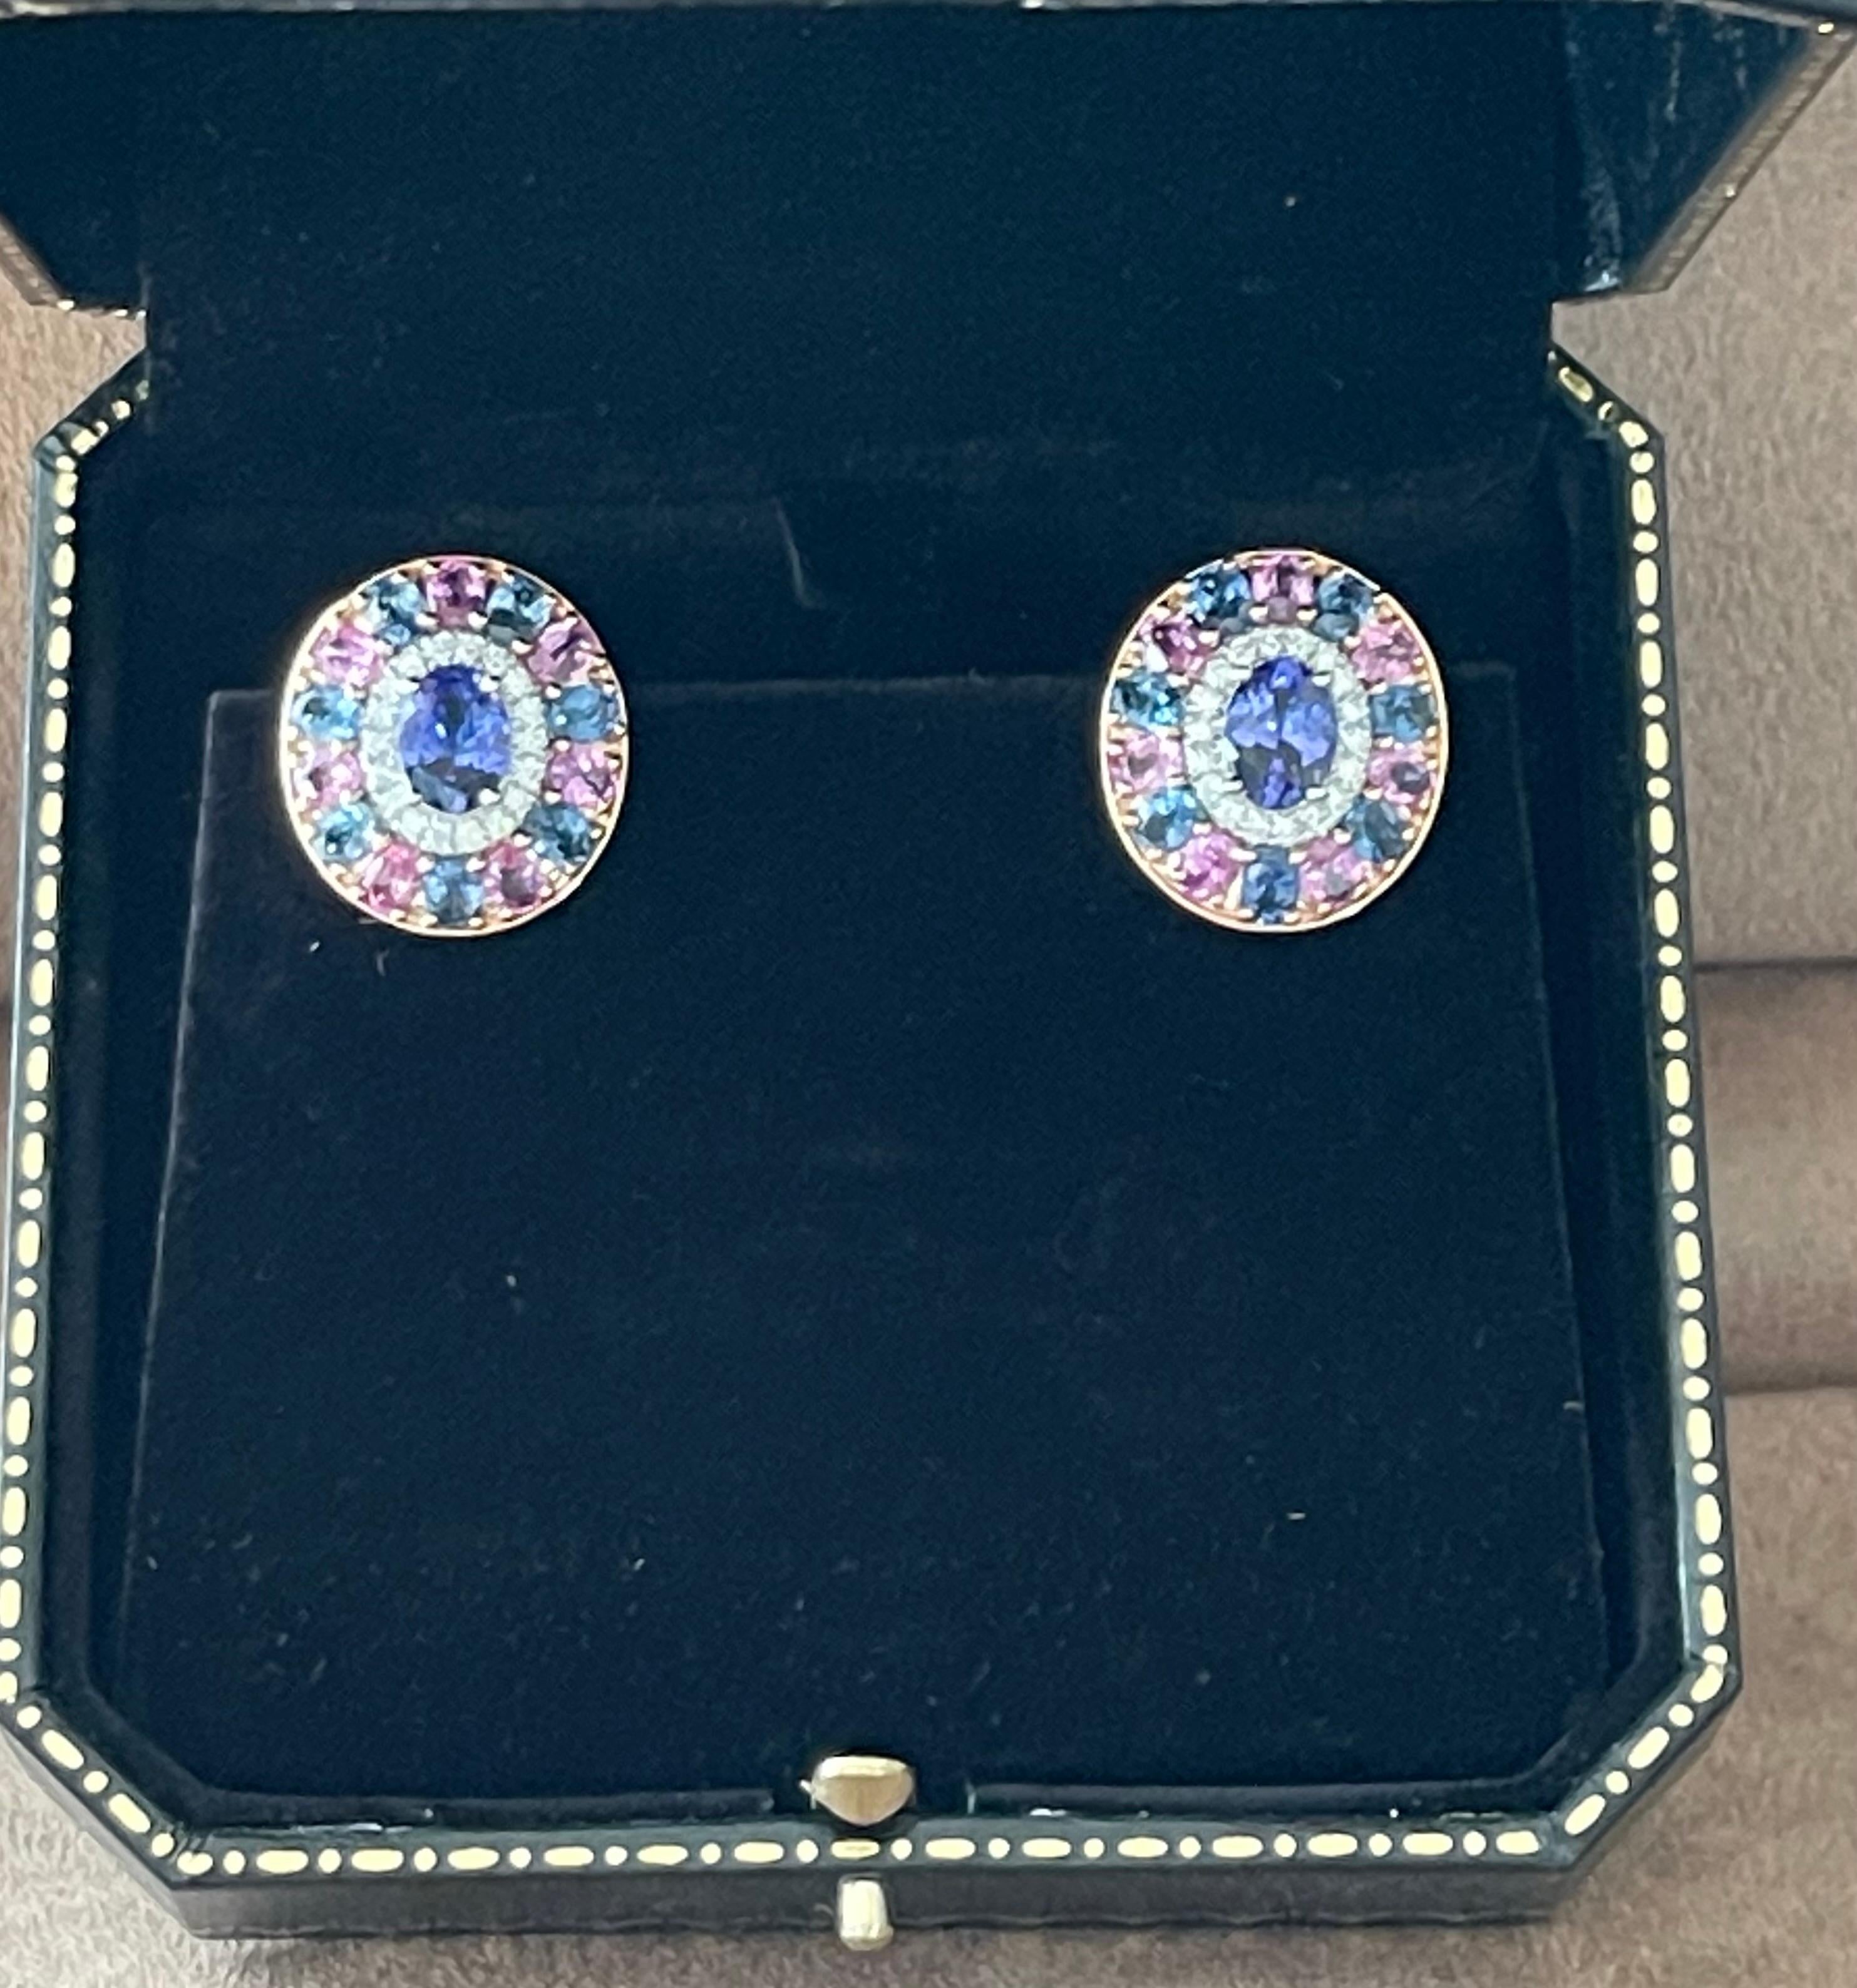 Oval Cut 18k Rose Gold Cluster Earrings Tanzanite Pink Sappire Blue Sapphire Diamond For Sale